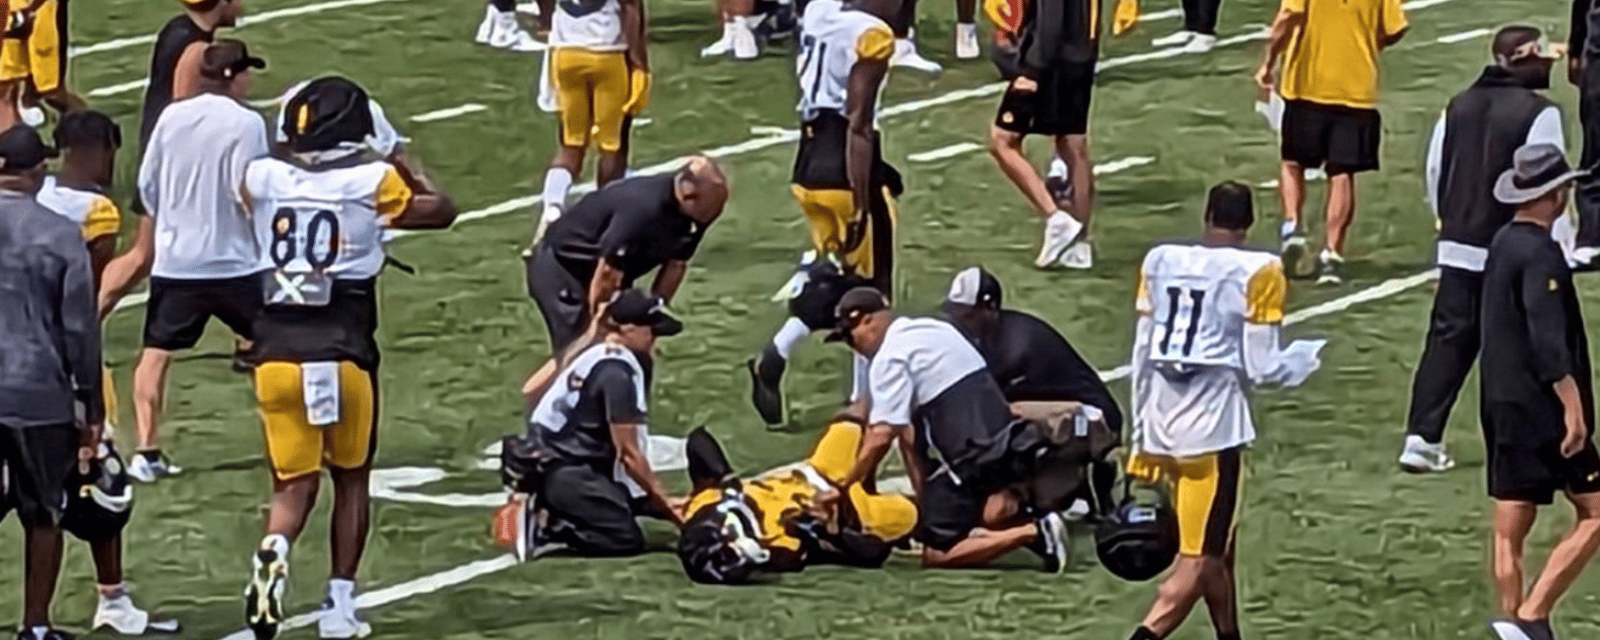 Pittsburgh Steelers player carted off field after injury 